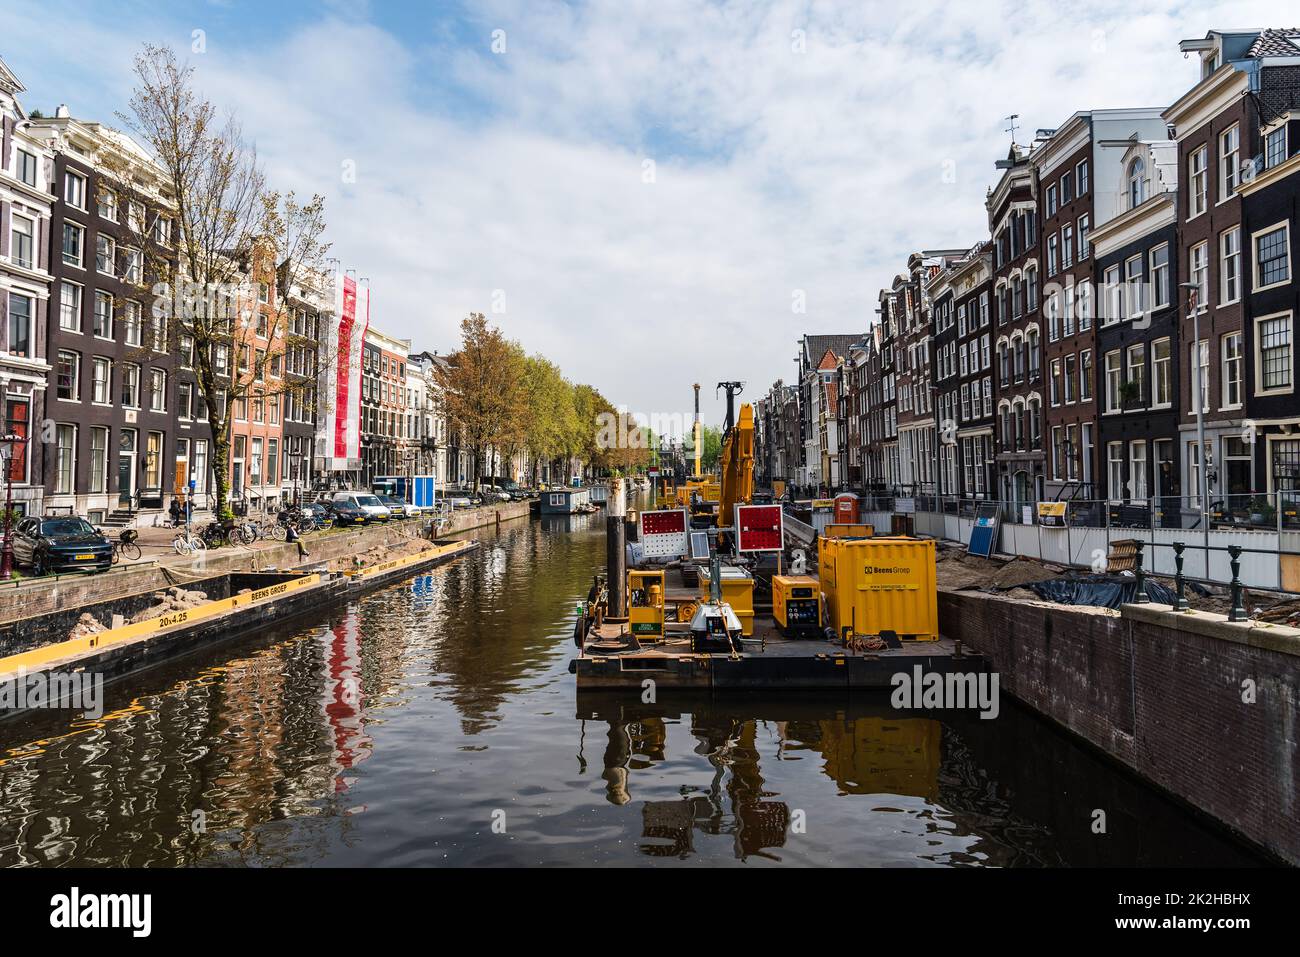 Amsterdam, Netherlands - May 7, 2022: Dredger barge carrying out maintenance and cleaning of a canal Stock Photo